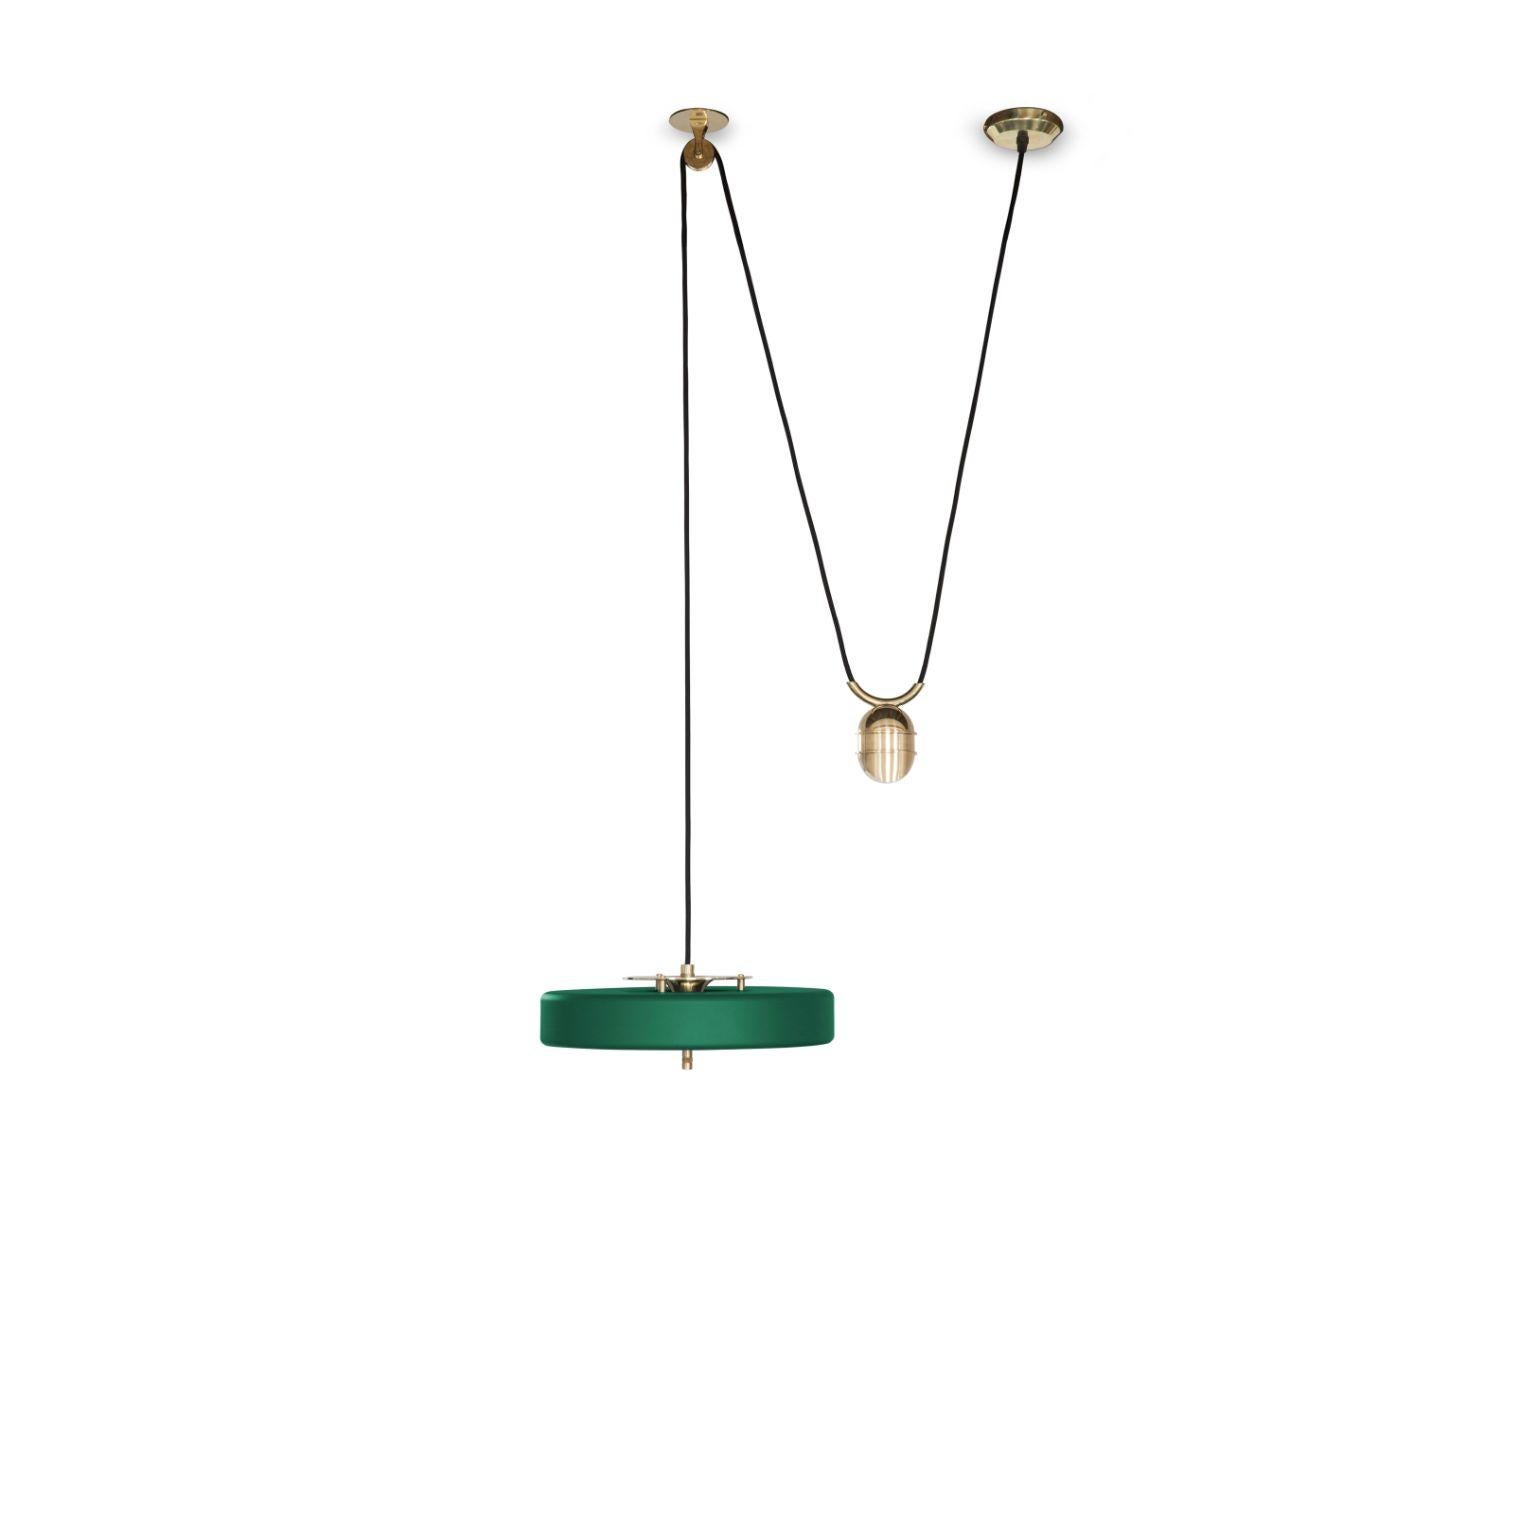 Revolve rise and fall pendant light - Brushed brass - Green by Bert Frank
Dimensions: 30 x 35 x 11 cm, small lamp 7.6 cm
Materials: Brass, steel

 
When Adam Yeats and Robbie Llewellyn founded Bert Frank in 2013 it was a meeting of minds and